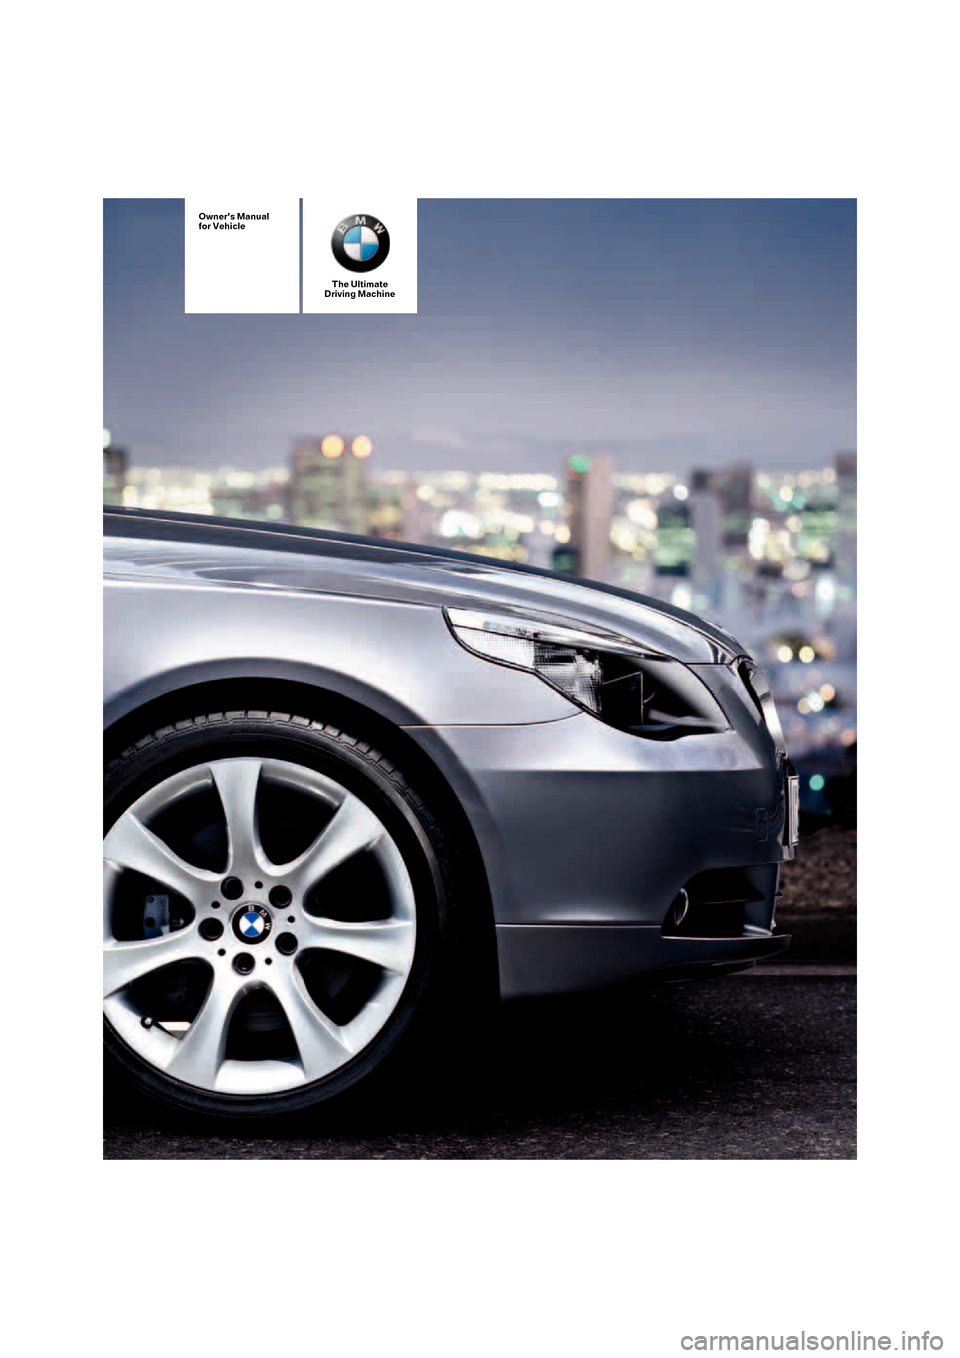 BMW 525I TOURING 2006 E61 Owners Manual The Ultimate
Driving Machine
Owners Manual
for Vehicle 